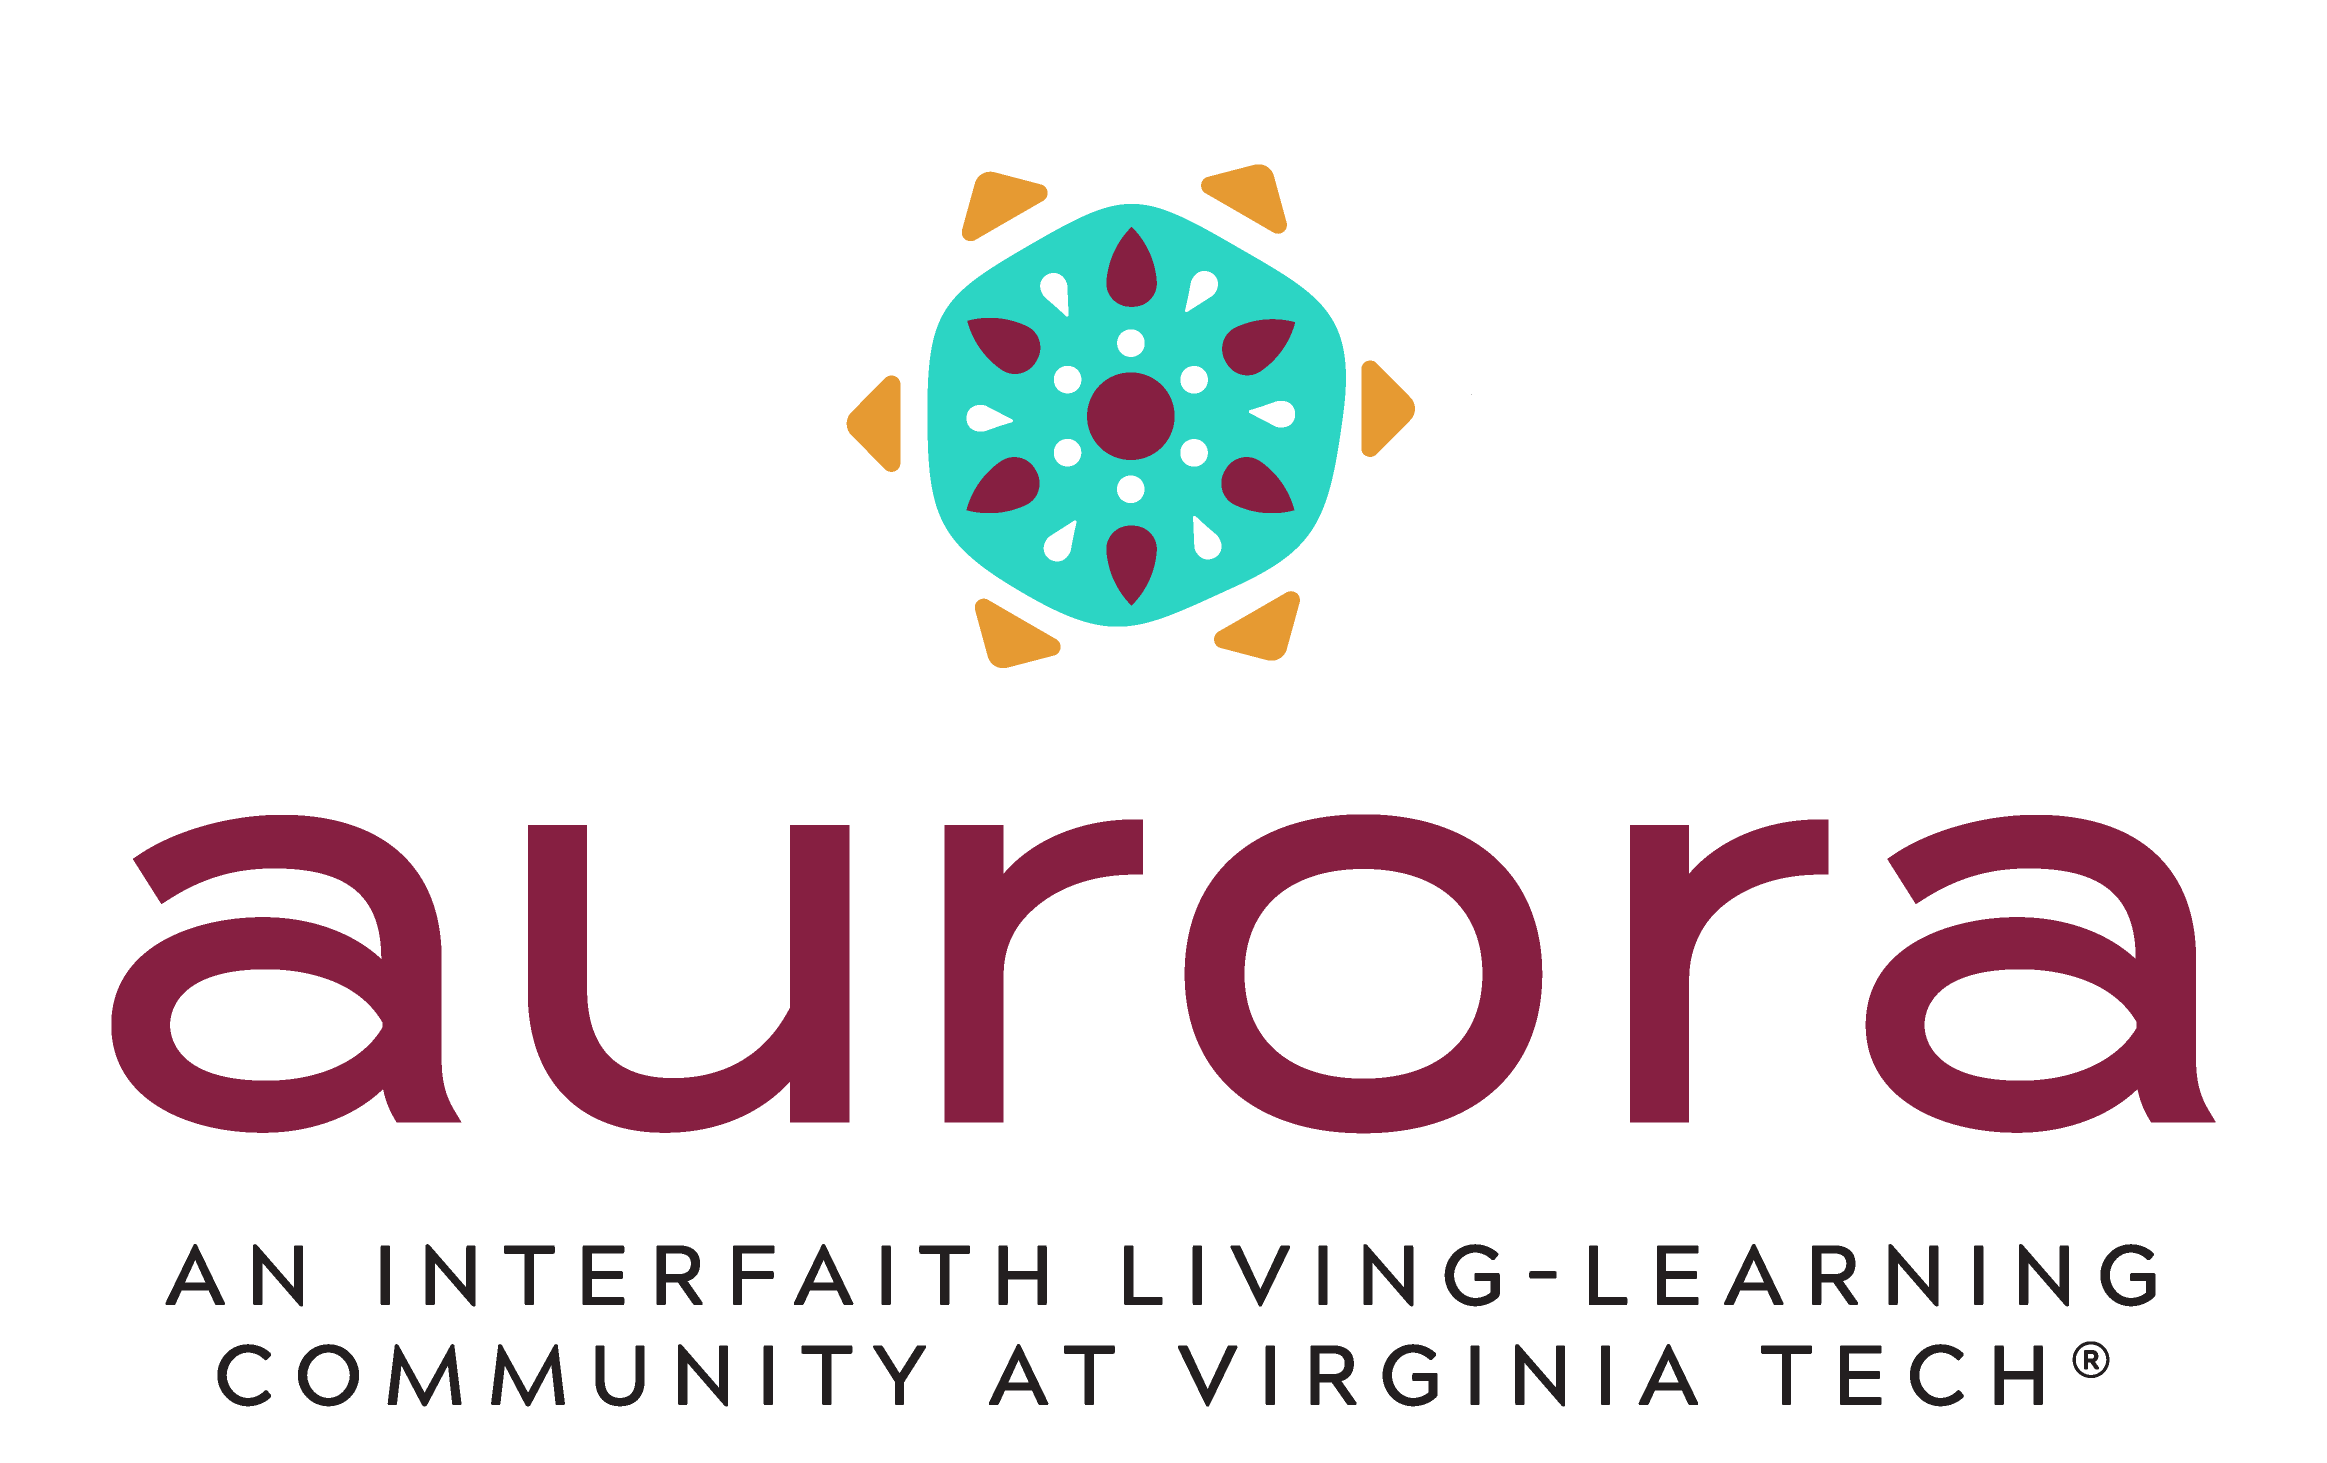 The Logo for the Aurora Interfaith Living-Learning Community